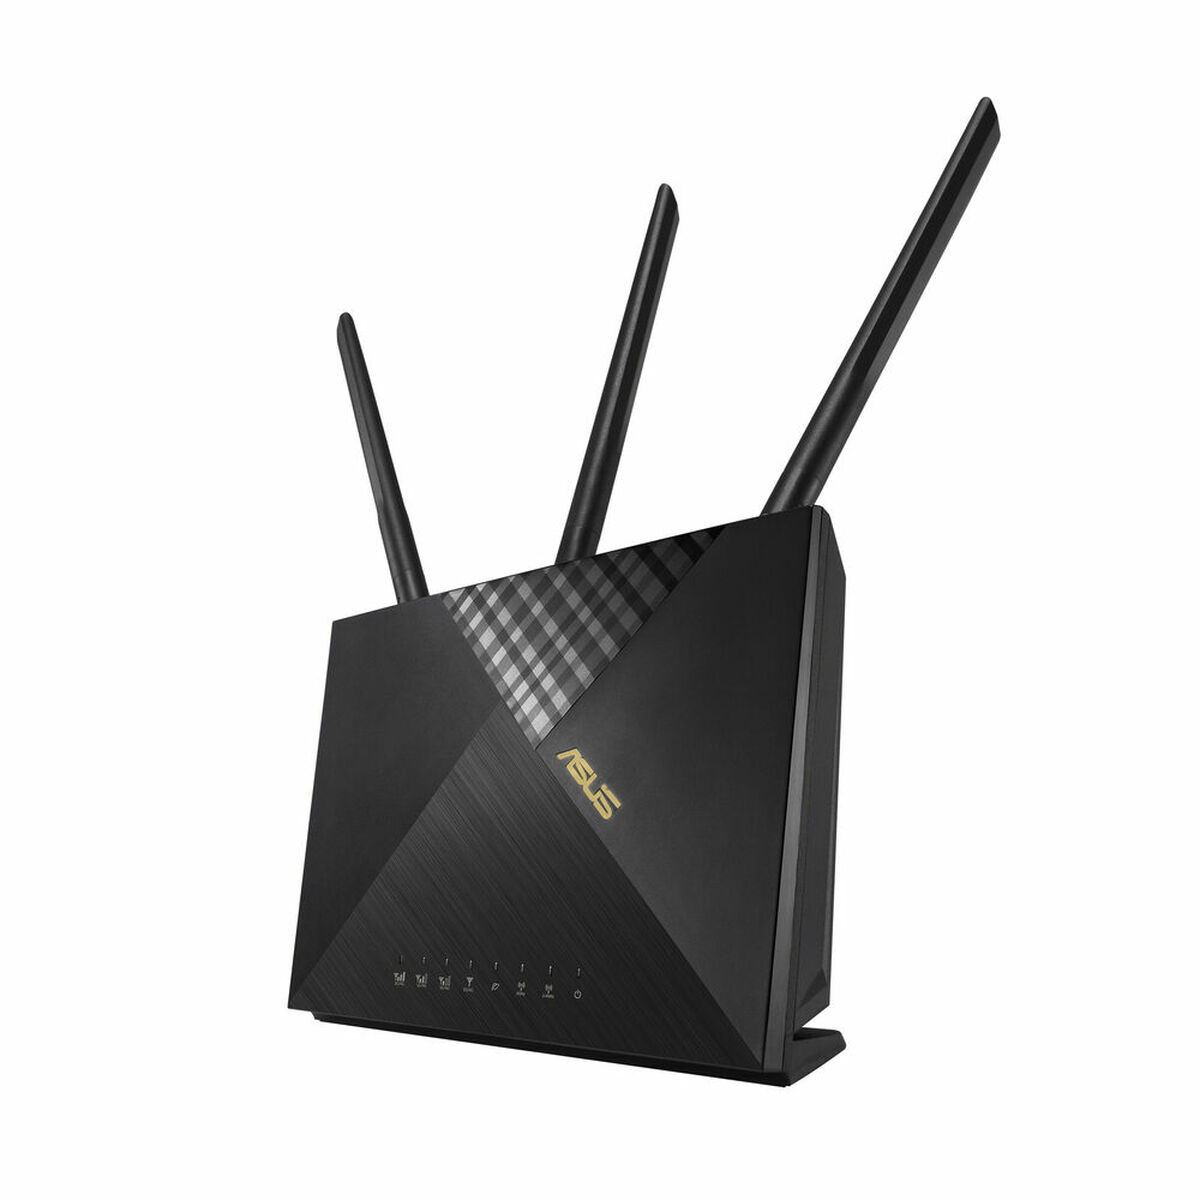 Router Asus 4G-AX56 Sort